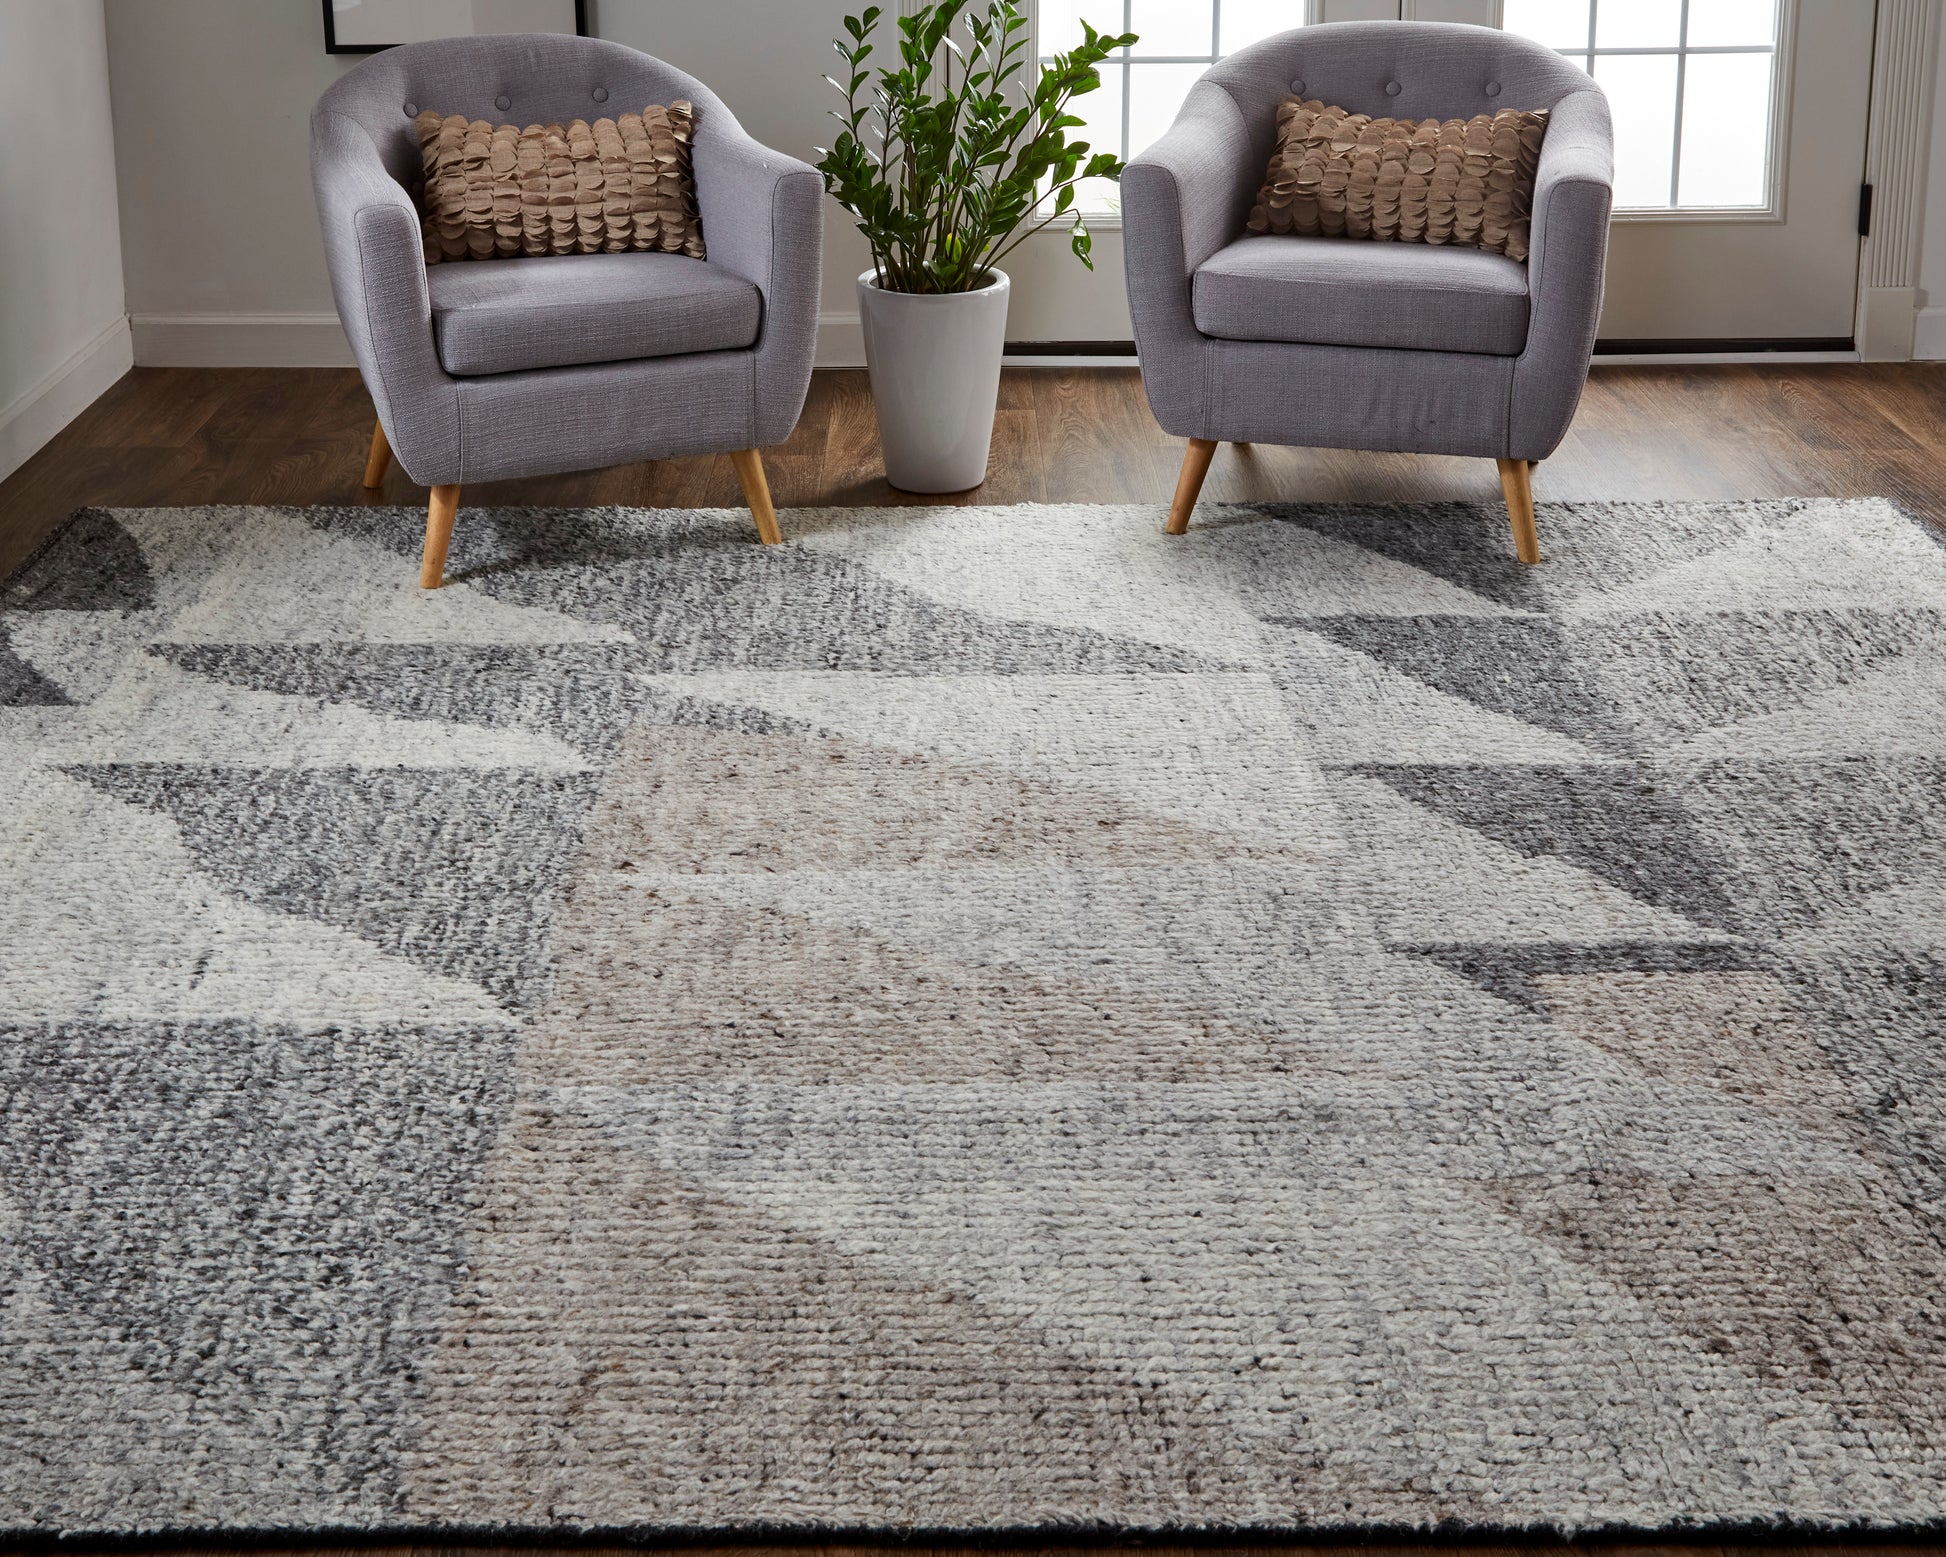 Feizy Alford 6910F Gray Modern/Bohemian & Eclectic/Rus Hand Knotted Rug